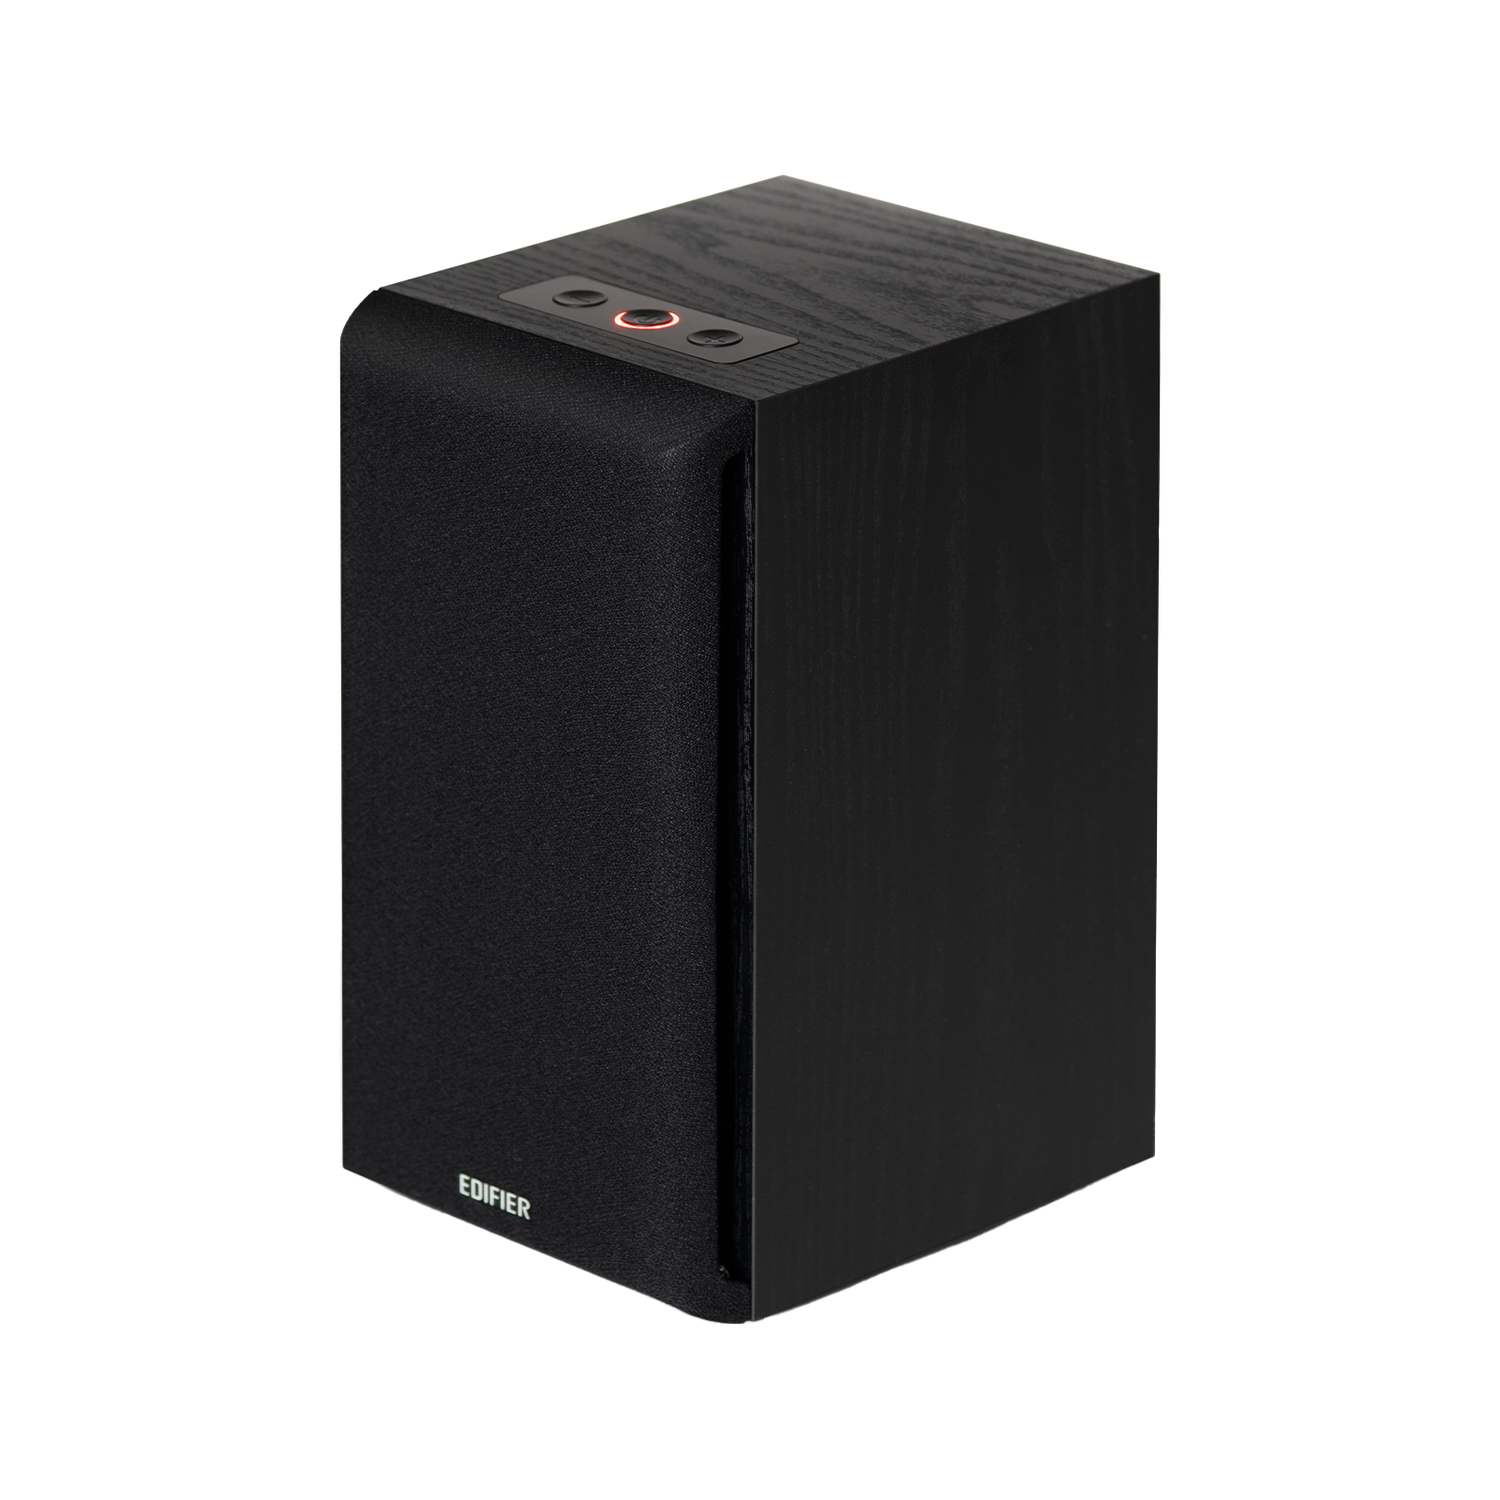 M601DB Multimedia Speaker with Wireless Subwoofer